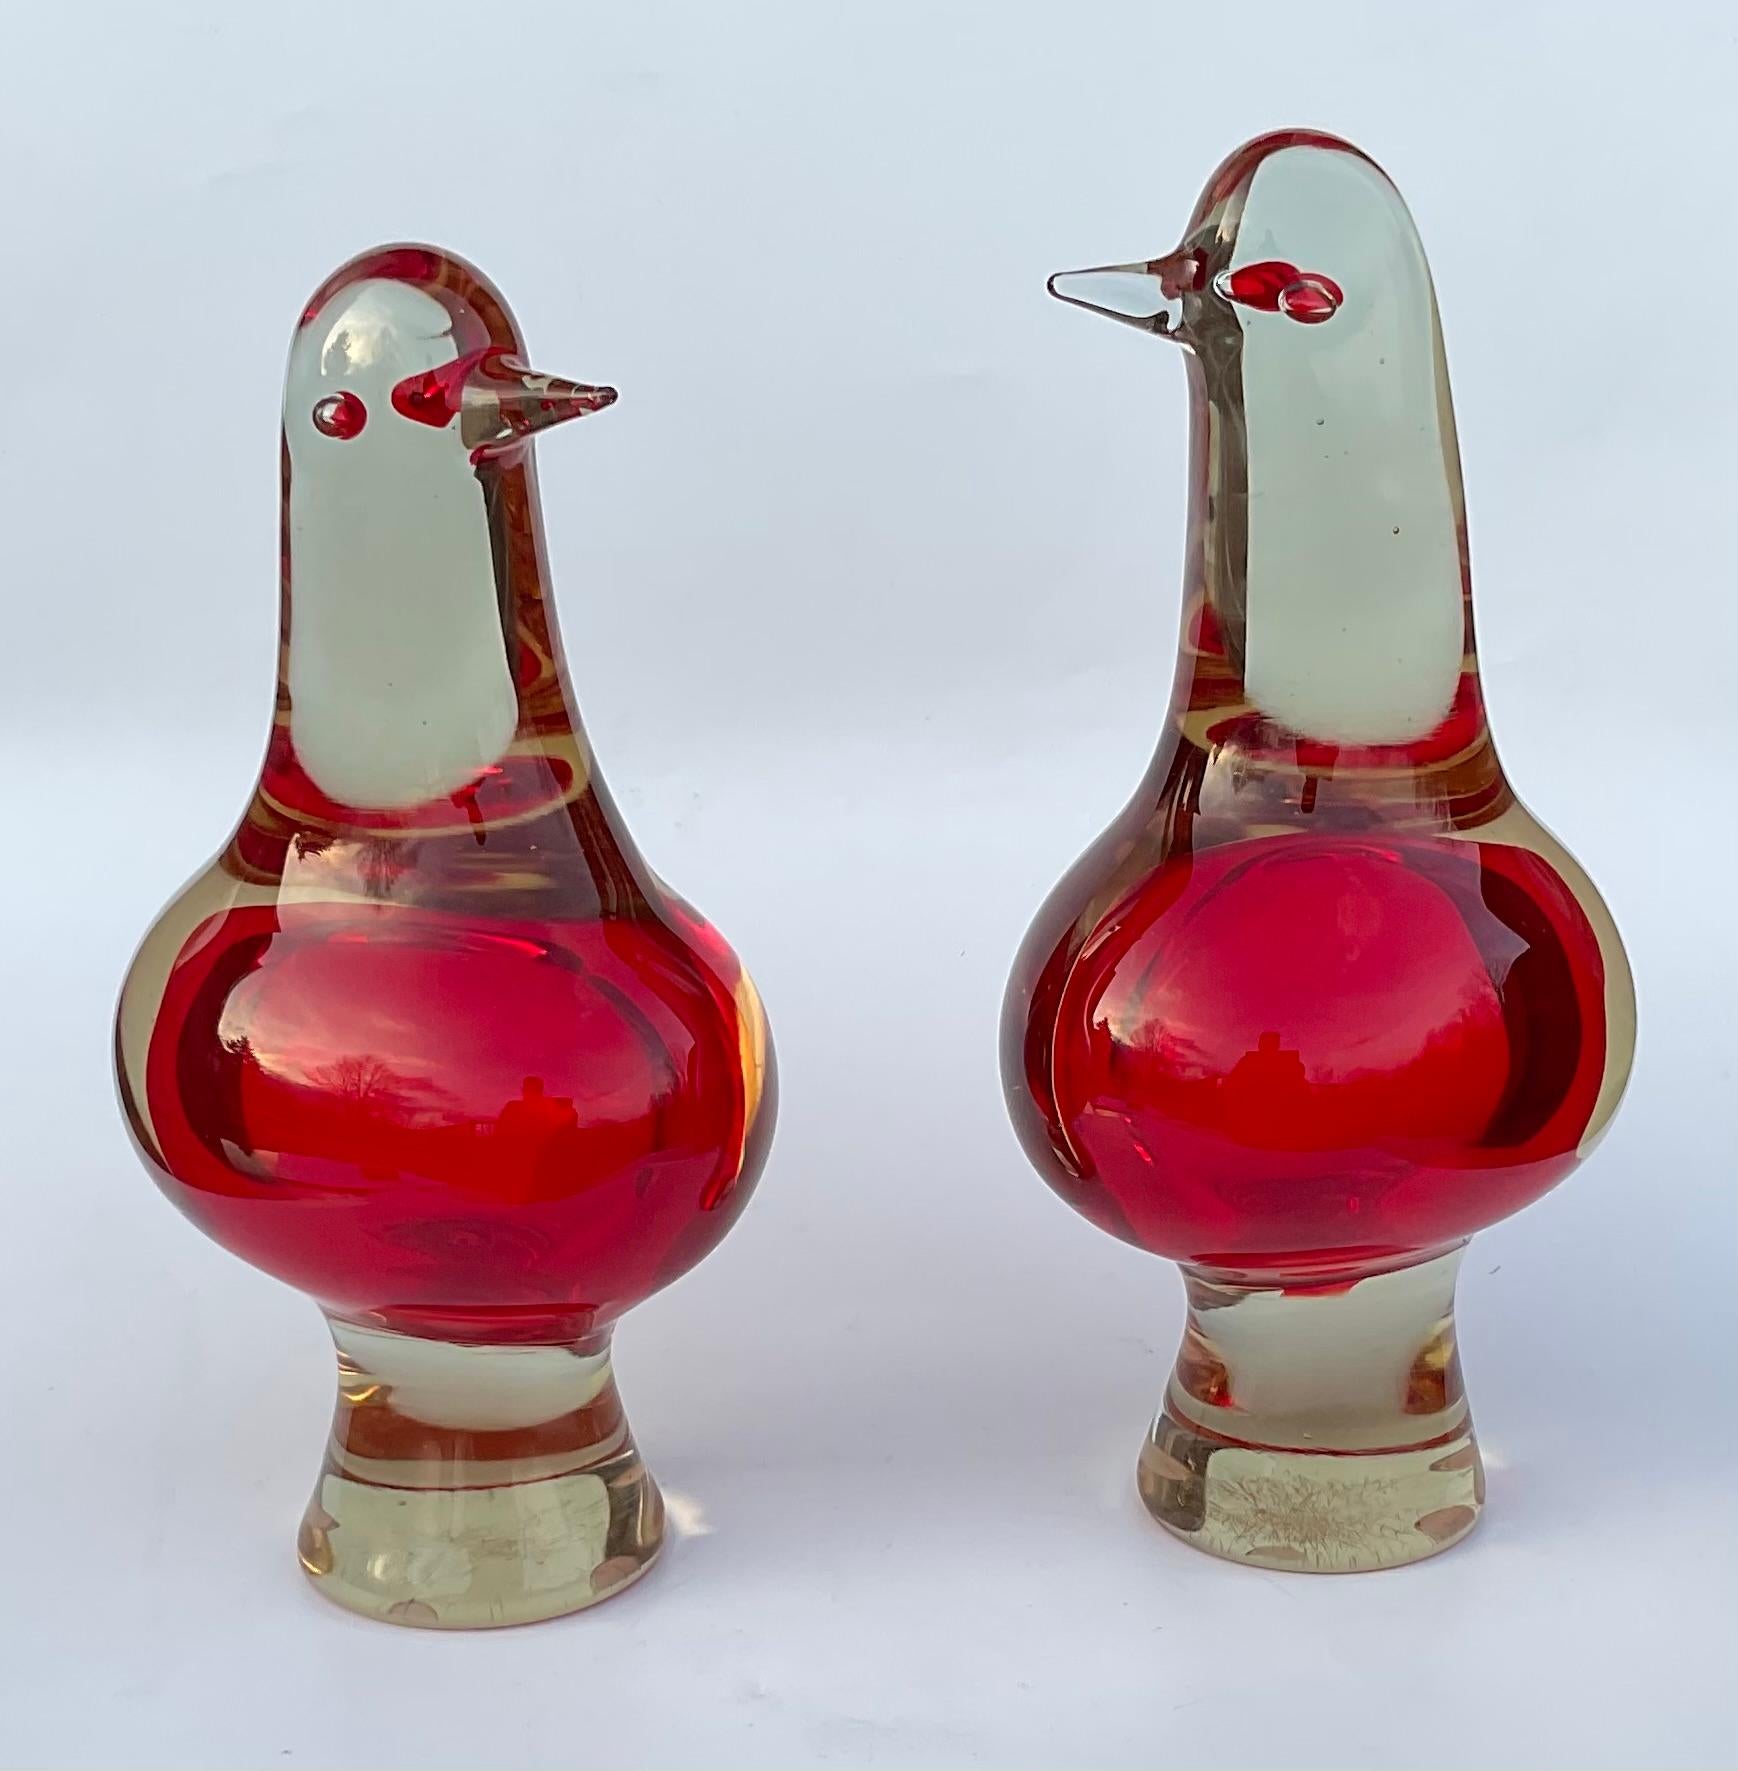 PAIR Large Antonio da Ros Cenedese Murano Sommerso Glass Figures Birds in Red In Good Condition For Sale In Ann Arbor, MI